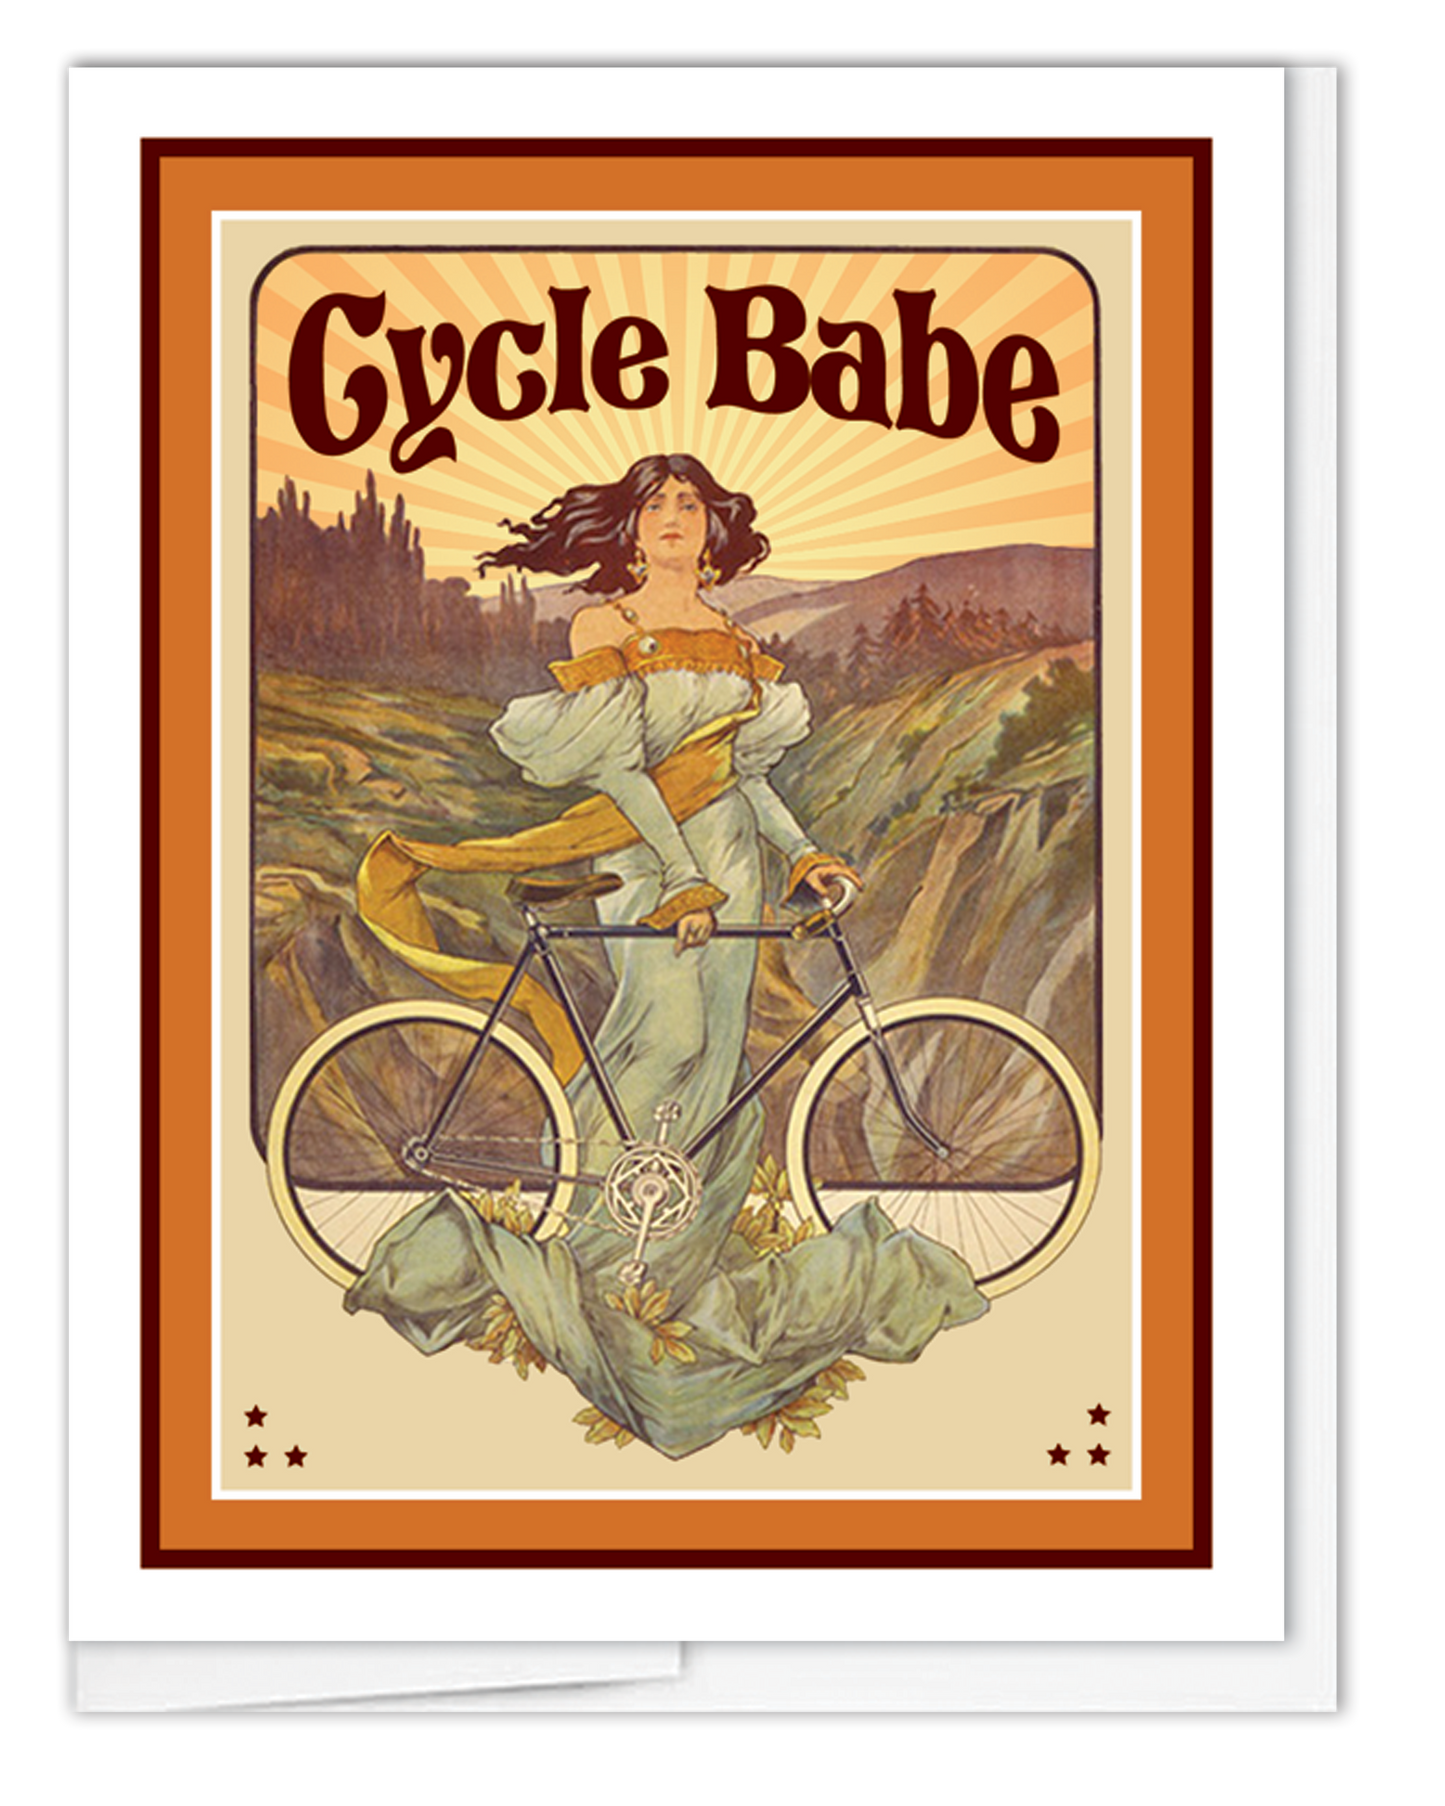 Cycle Babe